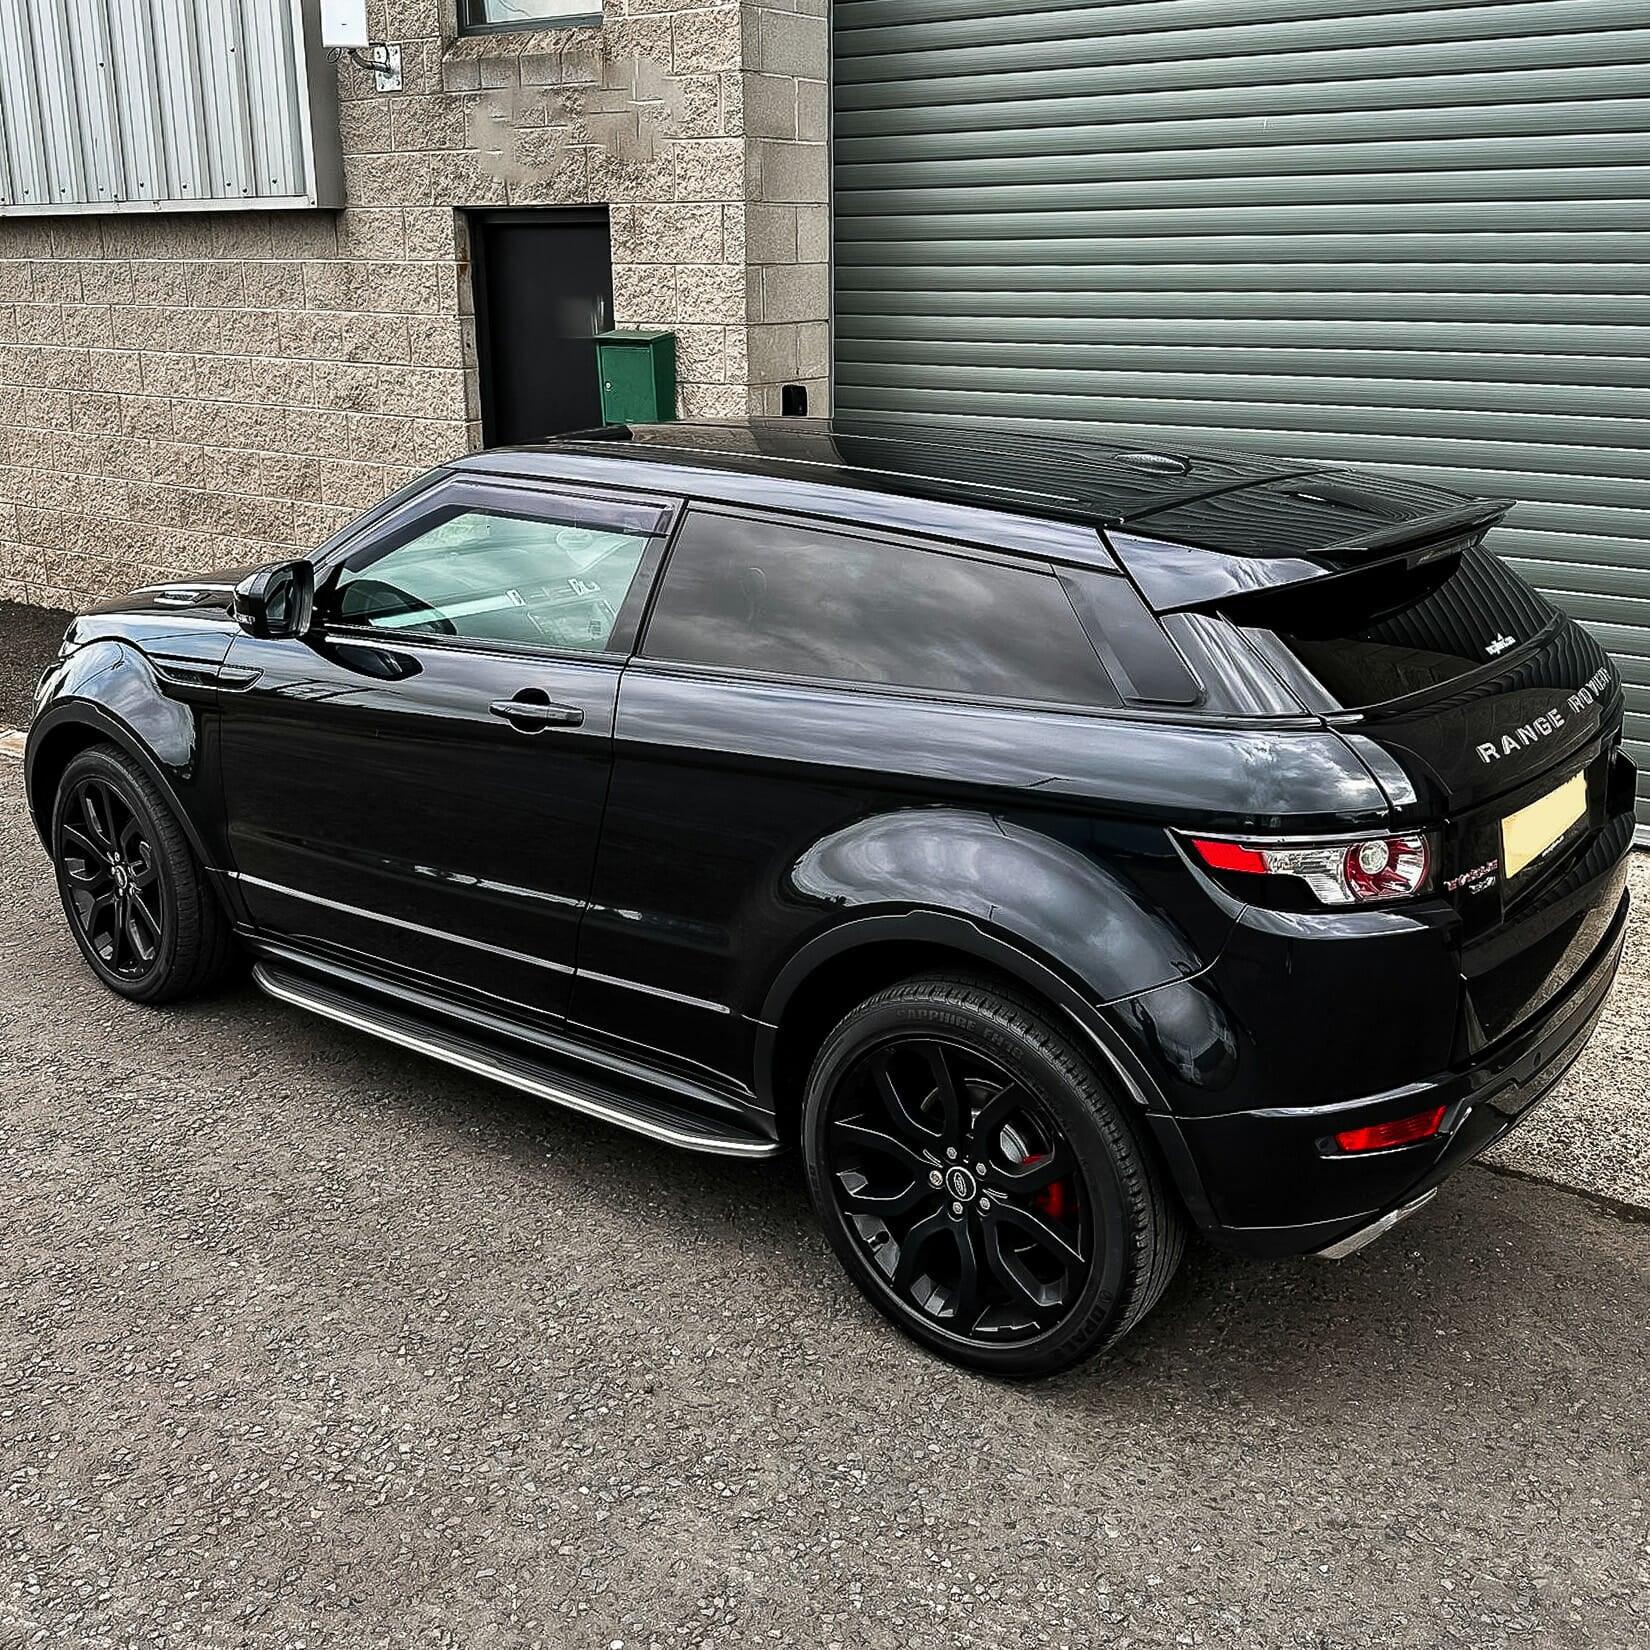 RANGE ROVER EVOQUE L538 - 2011 - 2019 - DYNAMIC OE STYLE RUNNING BOARDS - SIDE STEPS - PAIR - Storm Xccessories2